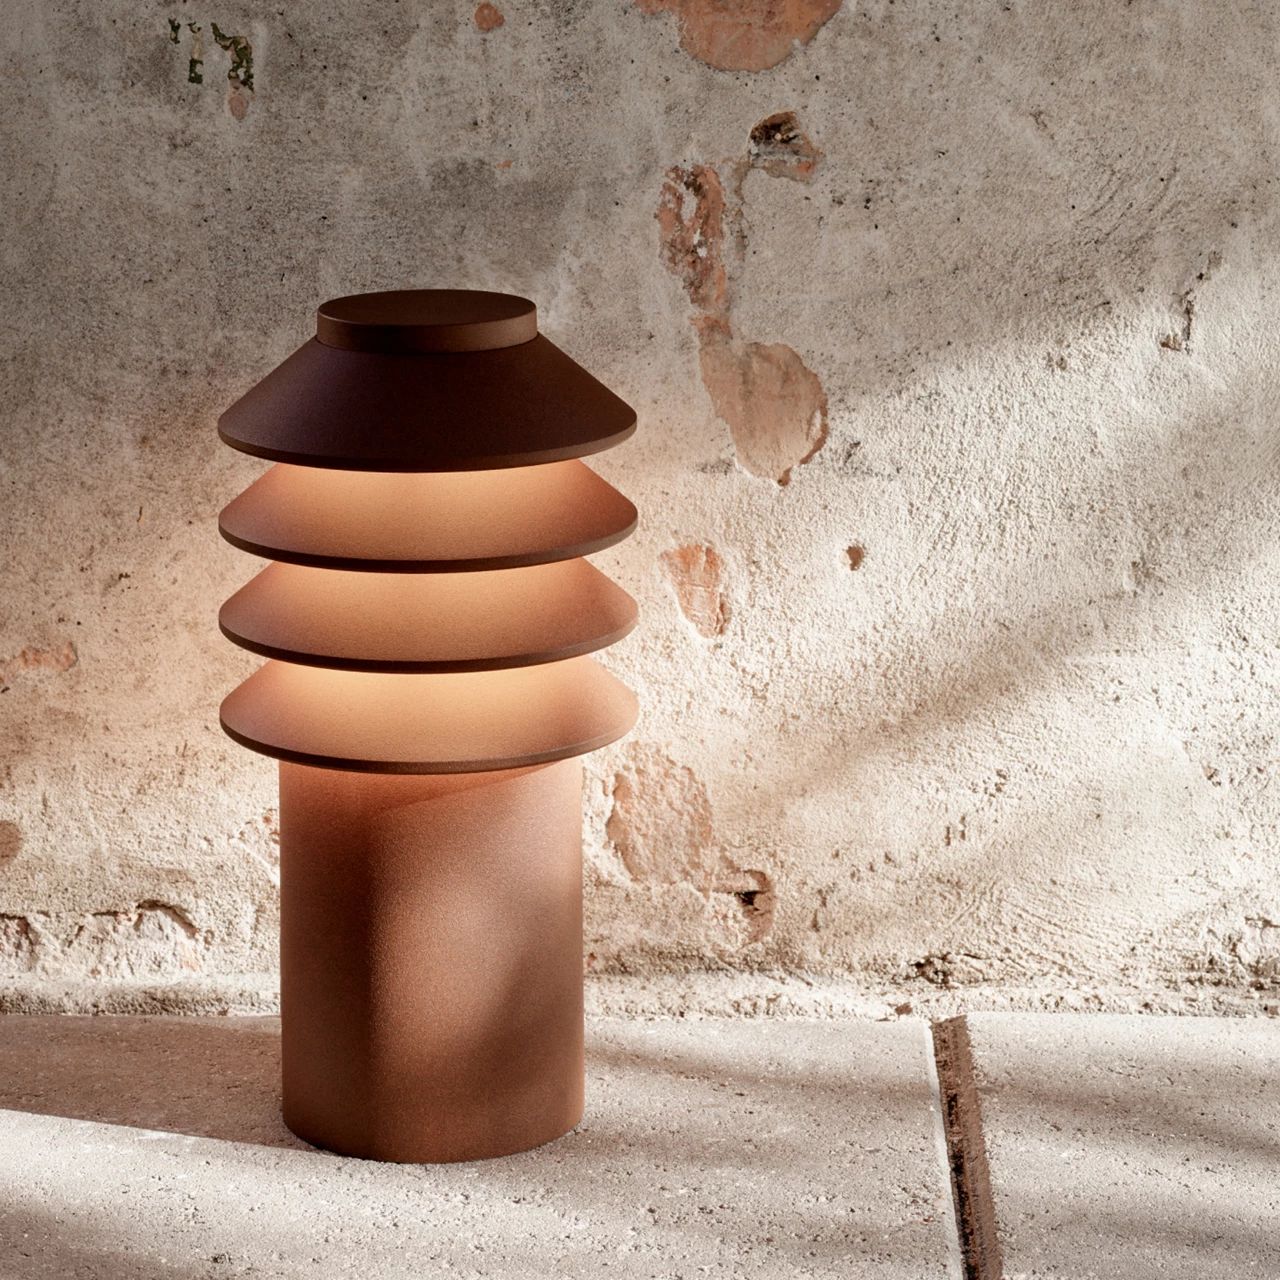 Louis Poulsen Bysted Garden Bollard Led 3000 K 14 W Spike Without Adaptor With Connector Long, Corten